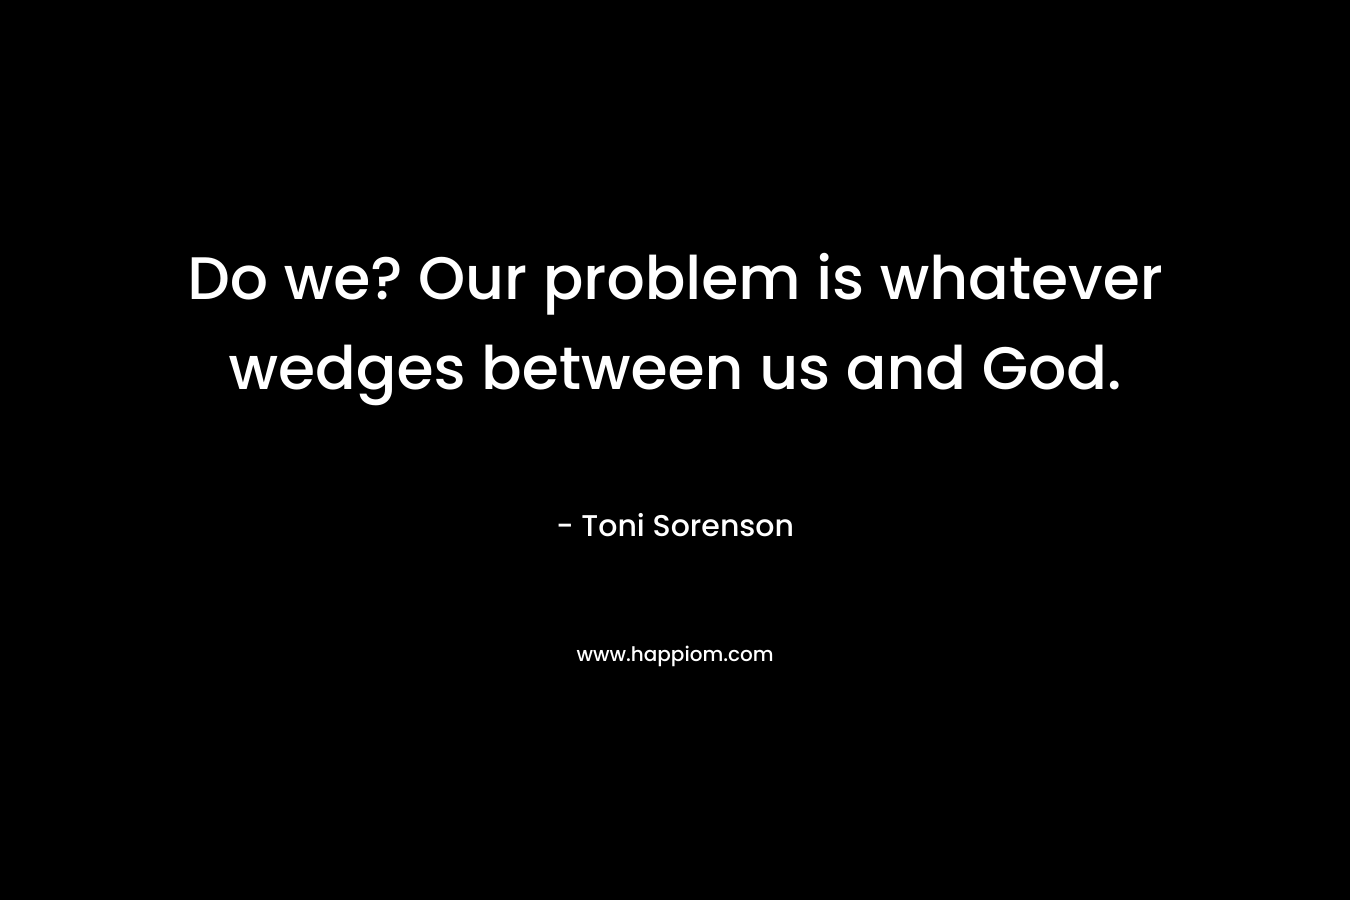 Do we? Our problem is whatever wedges between us and God. – Toni Sorenson